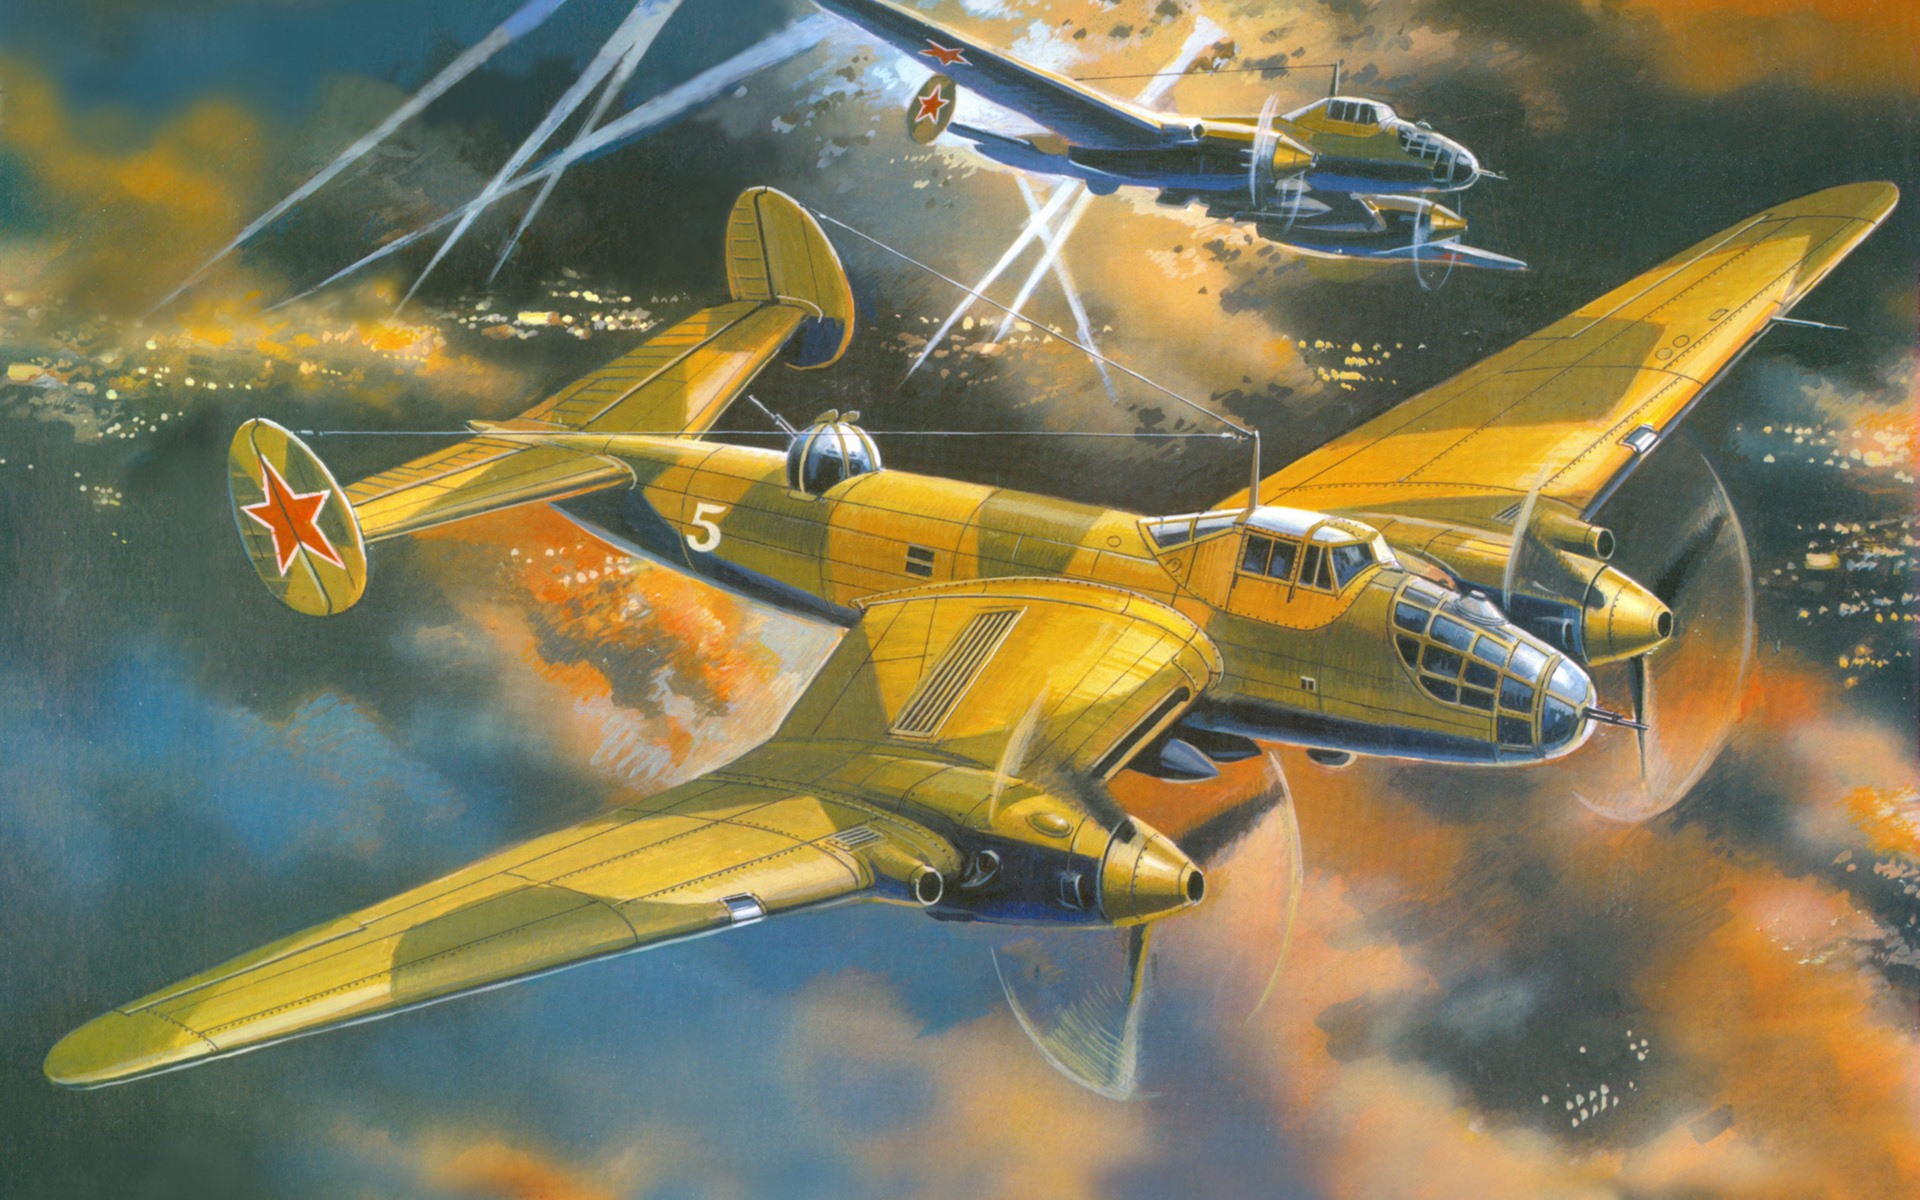 Military aircraft flight exquisite painting wallpapers #18 - 1920x1200